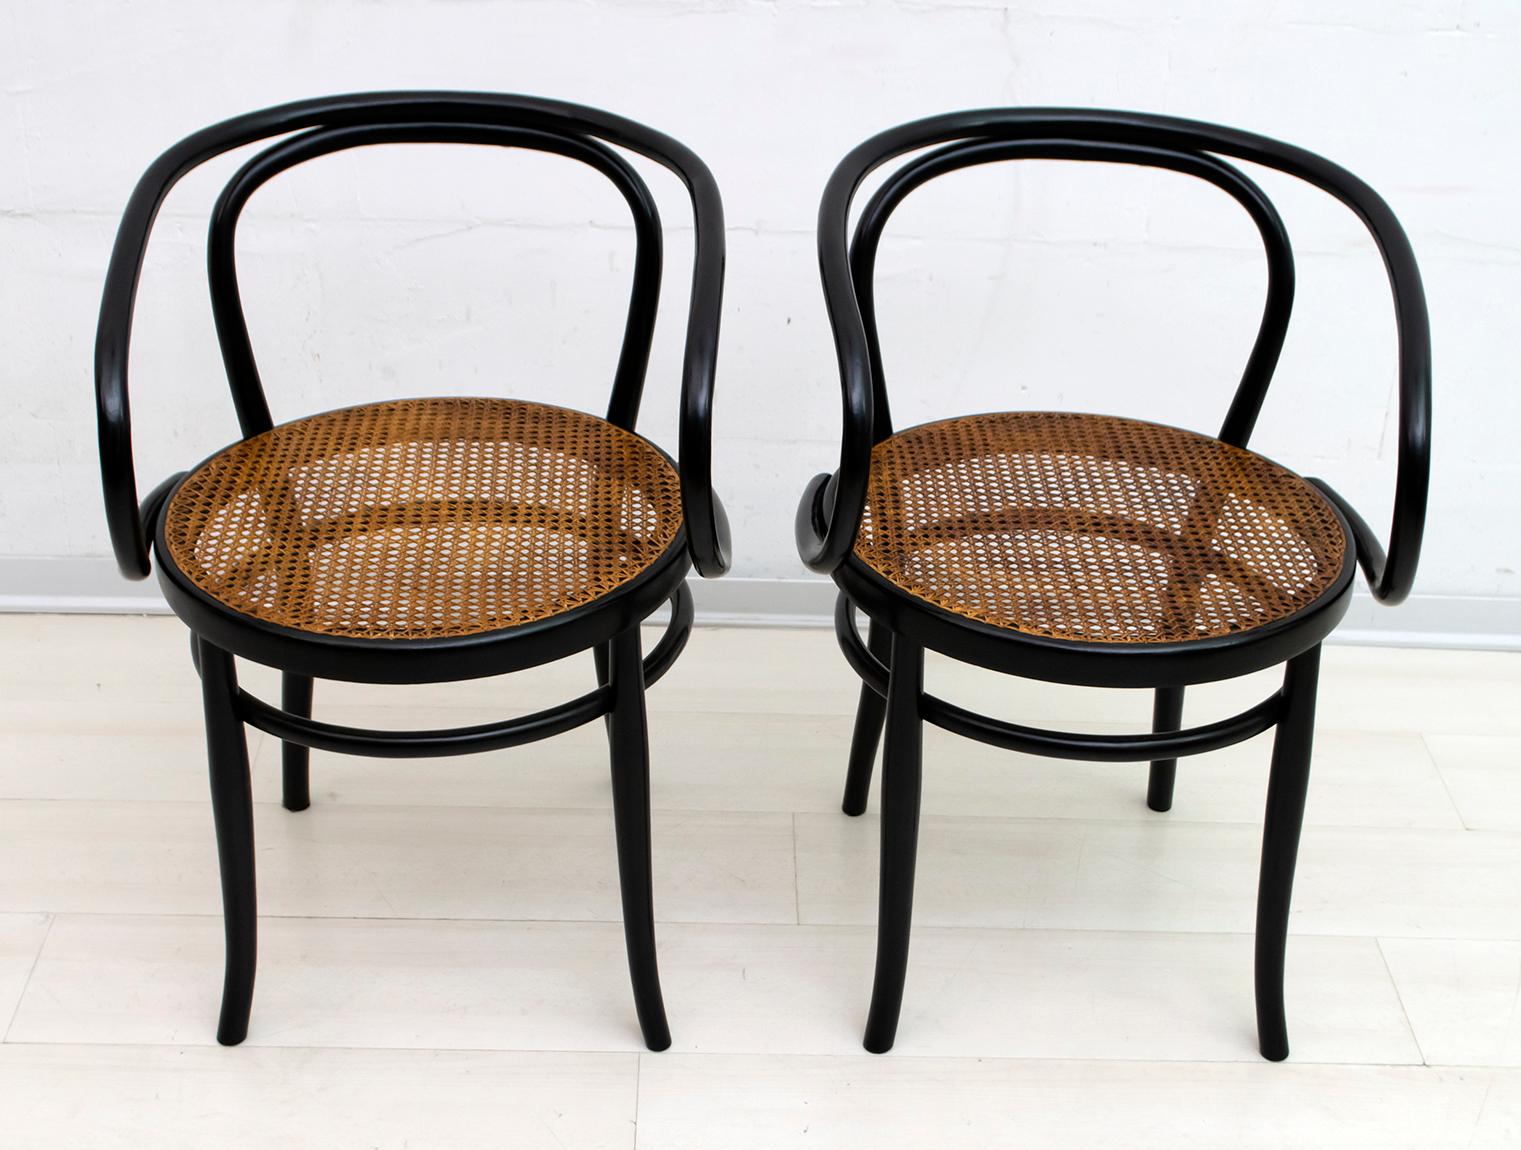 Pair of chairs in steam-bent beech and black lacquered, the seat is in handstitched Vienna straw, branded Thonet model 209.